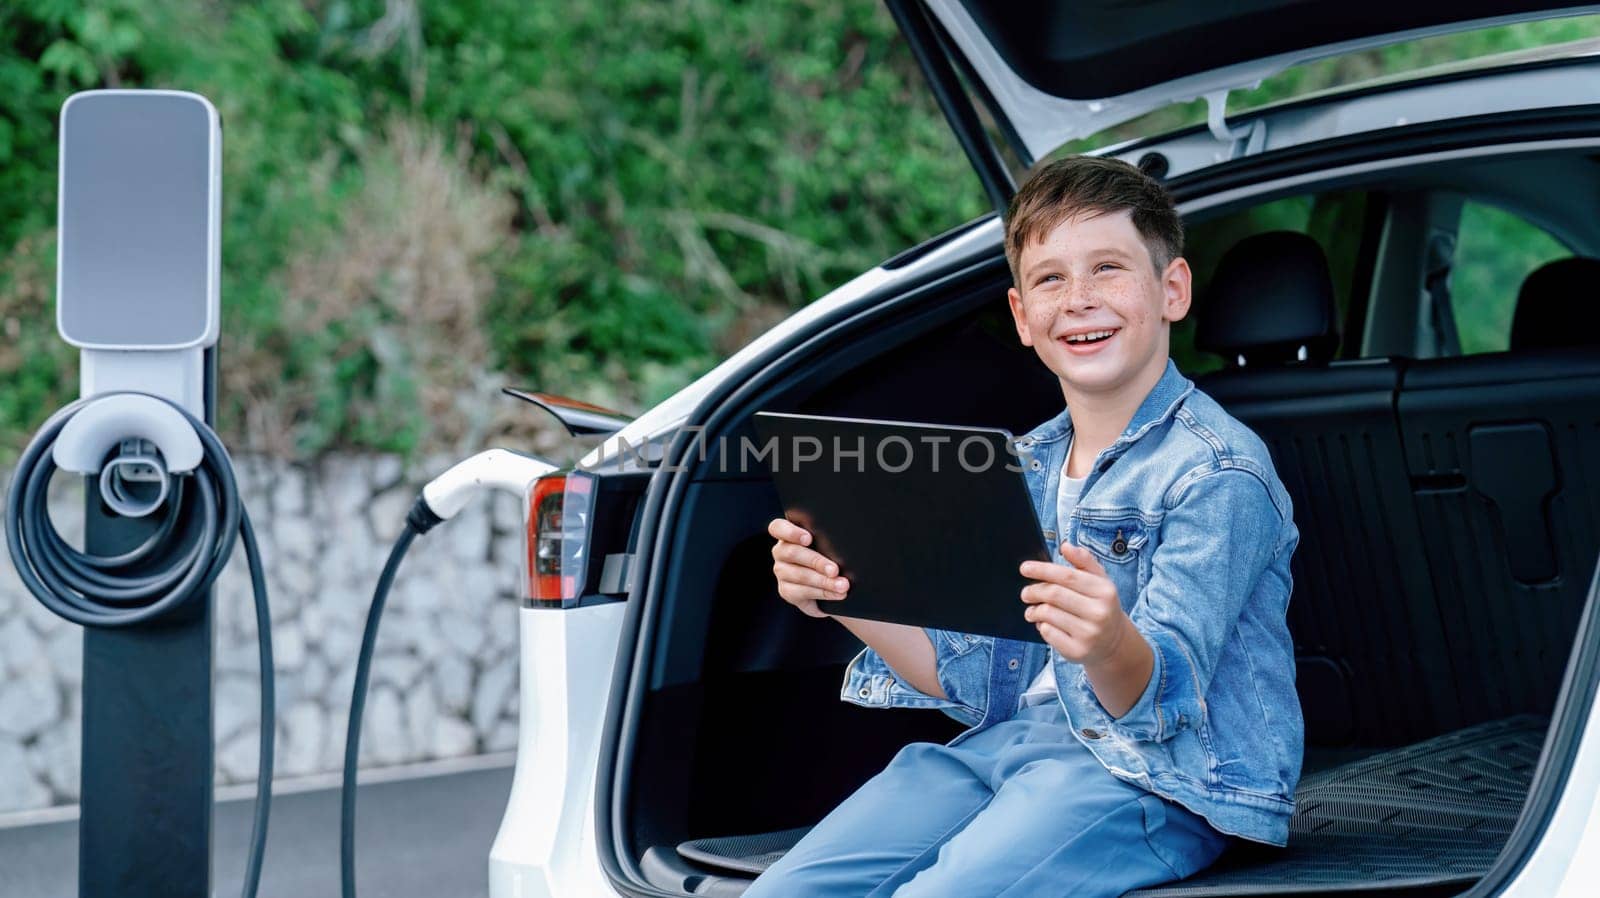 Little boy sitting on car trunk, using tablet while recharging eco-friendly car from EV charging station. EV car road trip travel as alternative vehicle using sustainable energy concept. Perpetual